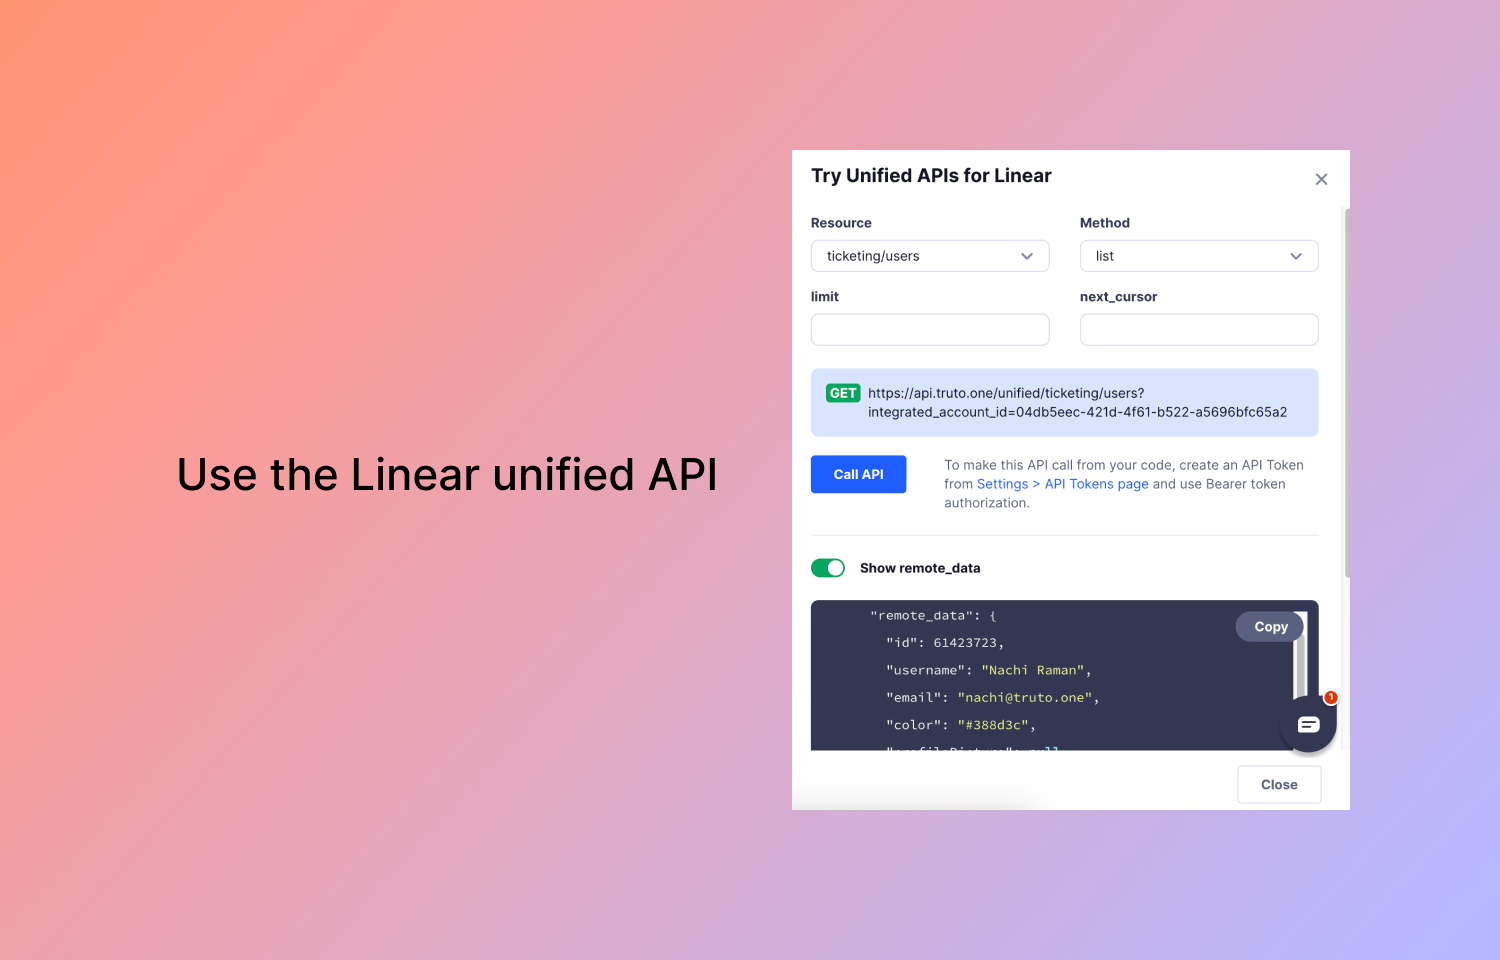 Image showing the unified APIs for Linear